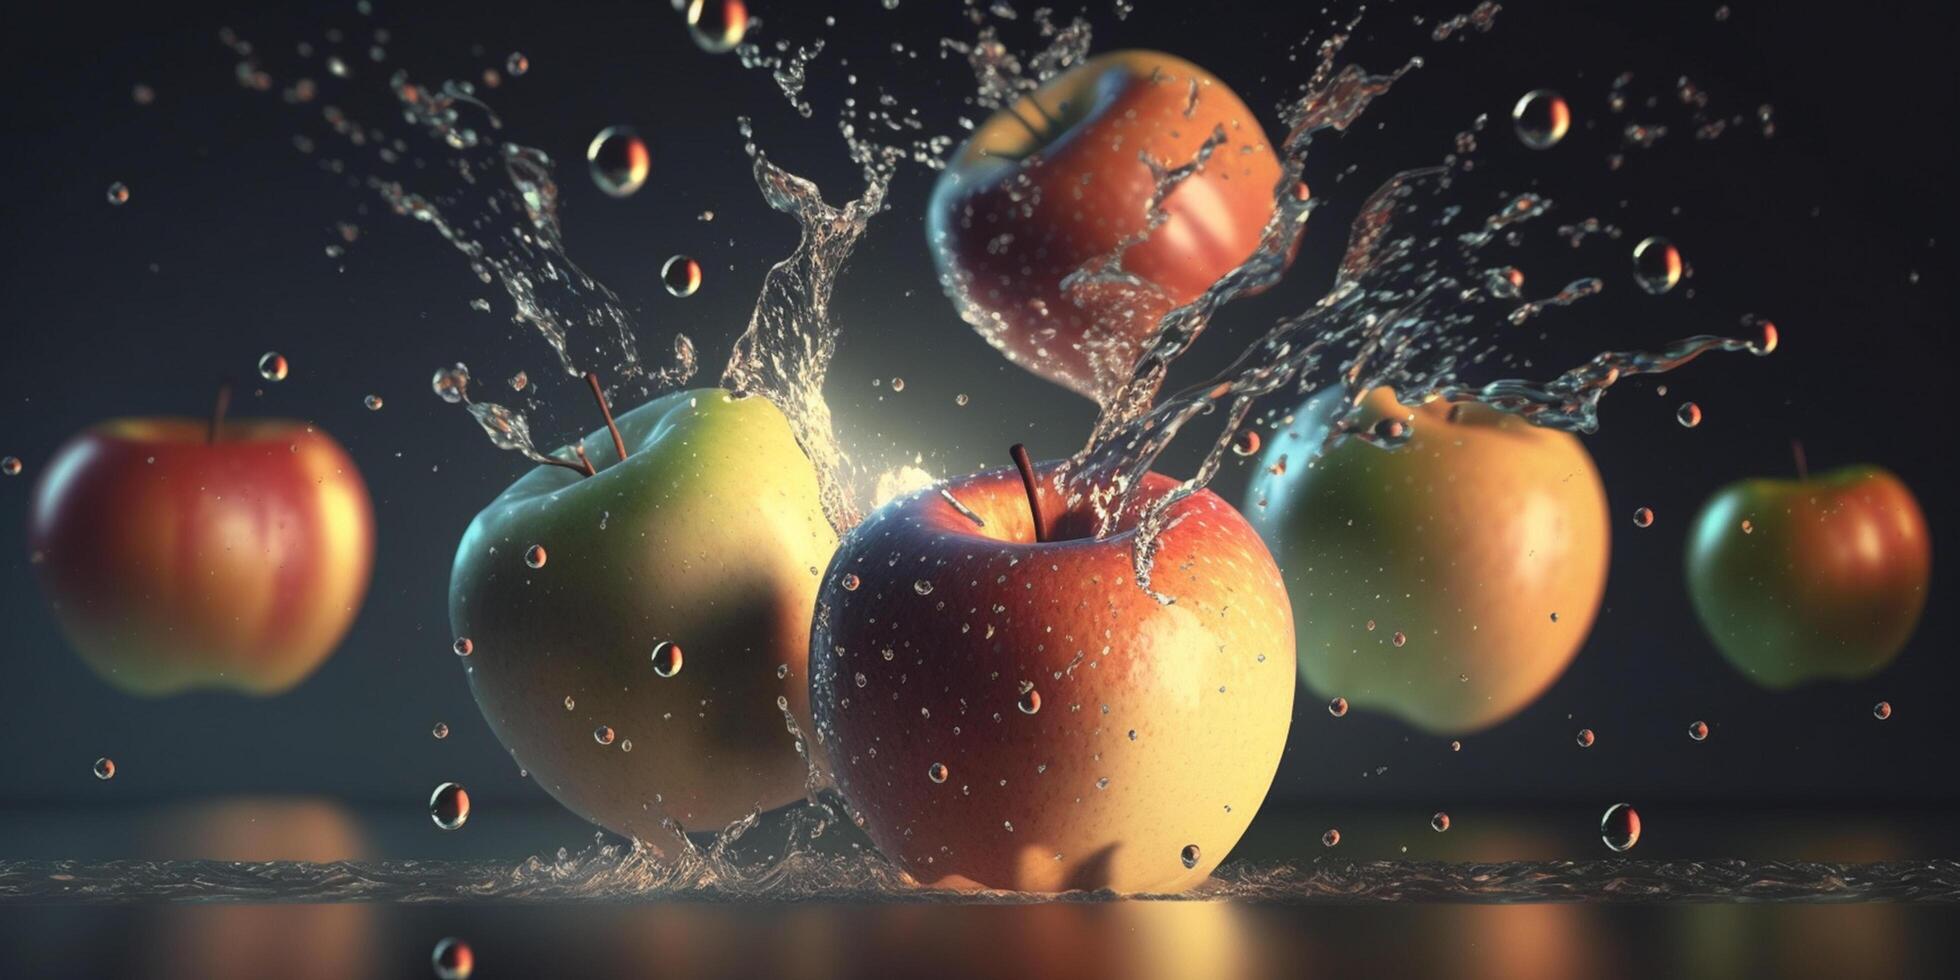 Several Apples Falling into Water - A Digital Illustration Depicting the Ripple Effect of Fruit Impact photo